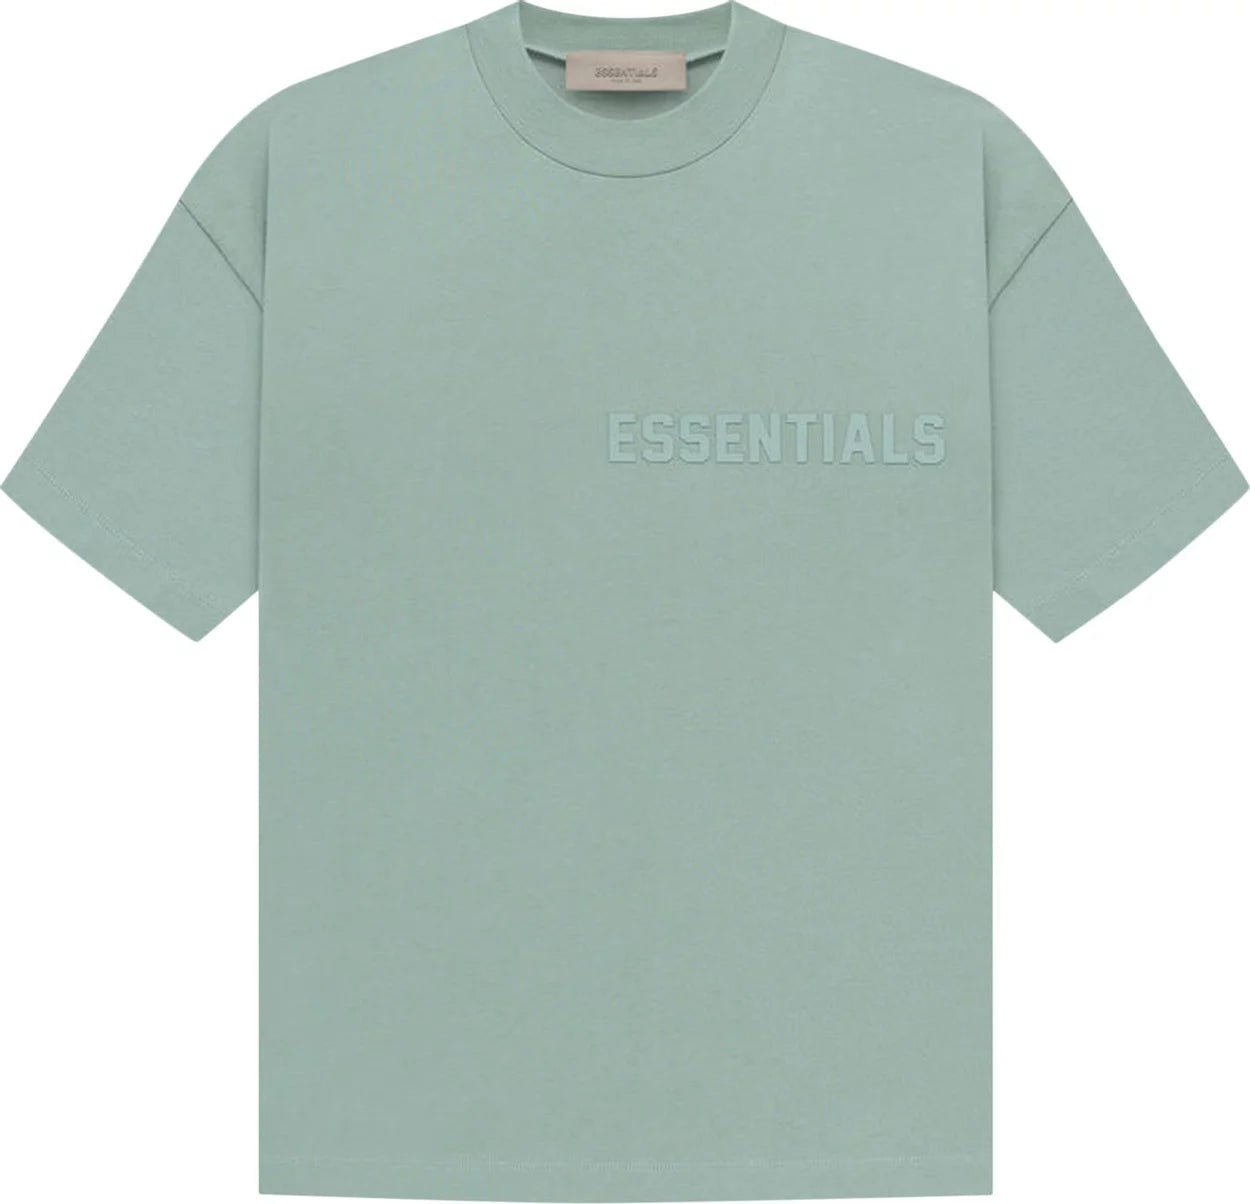 Essentials Fear of God 'Sycamore' T-Shirt (Kids)